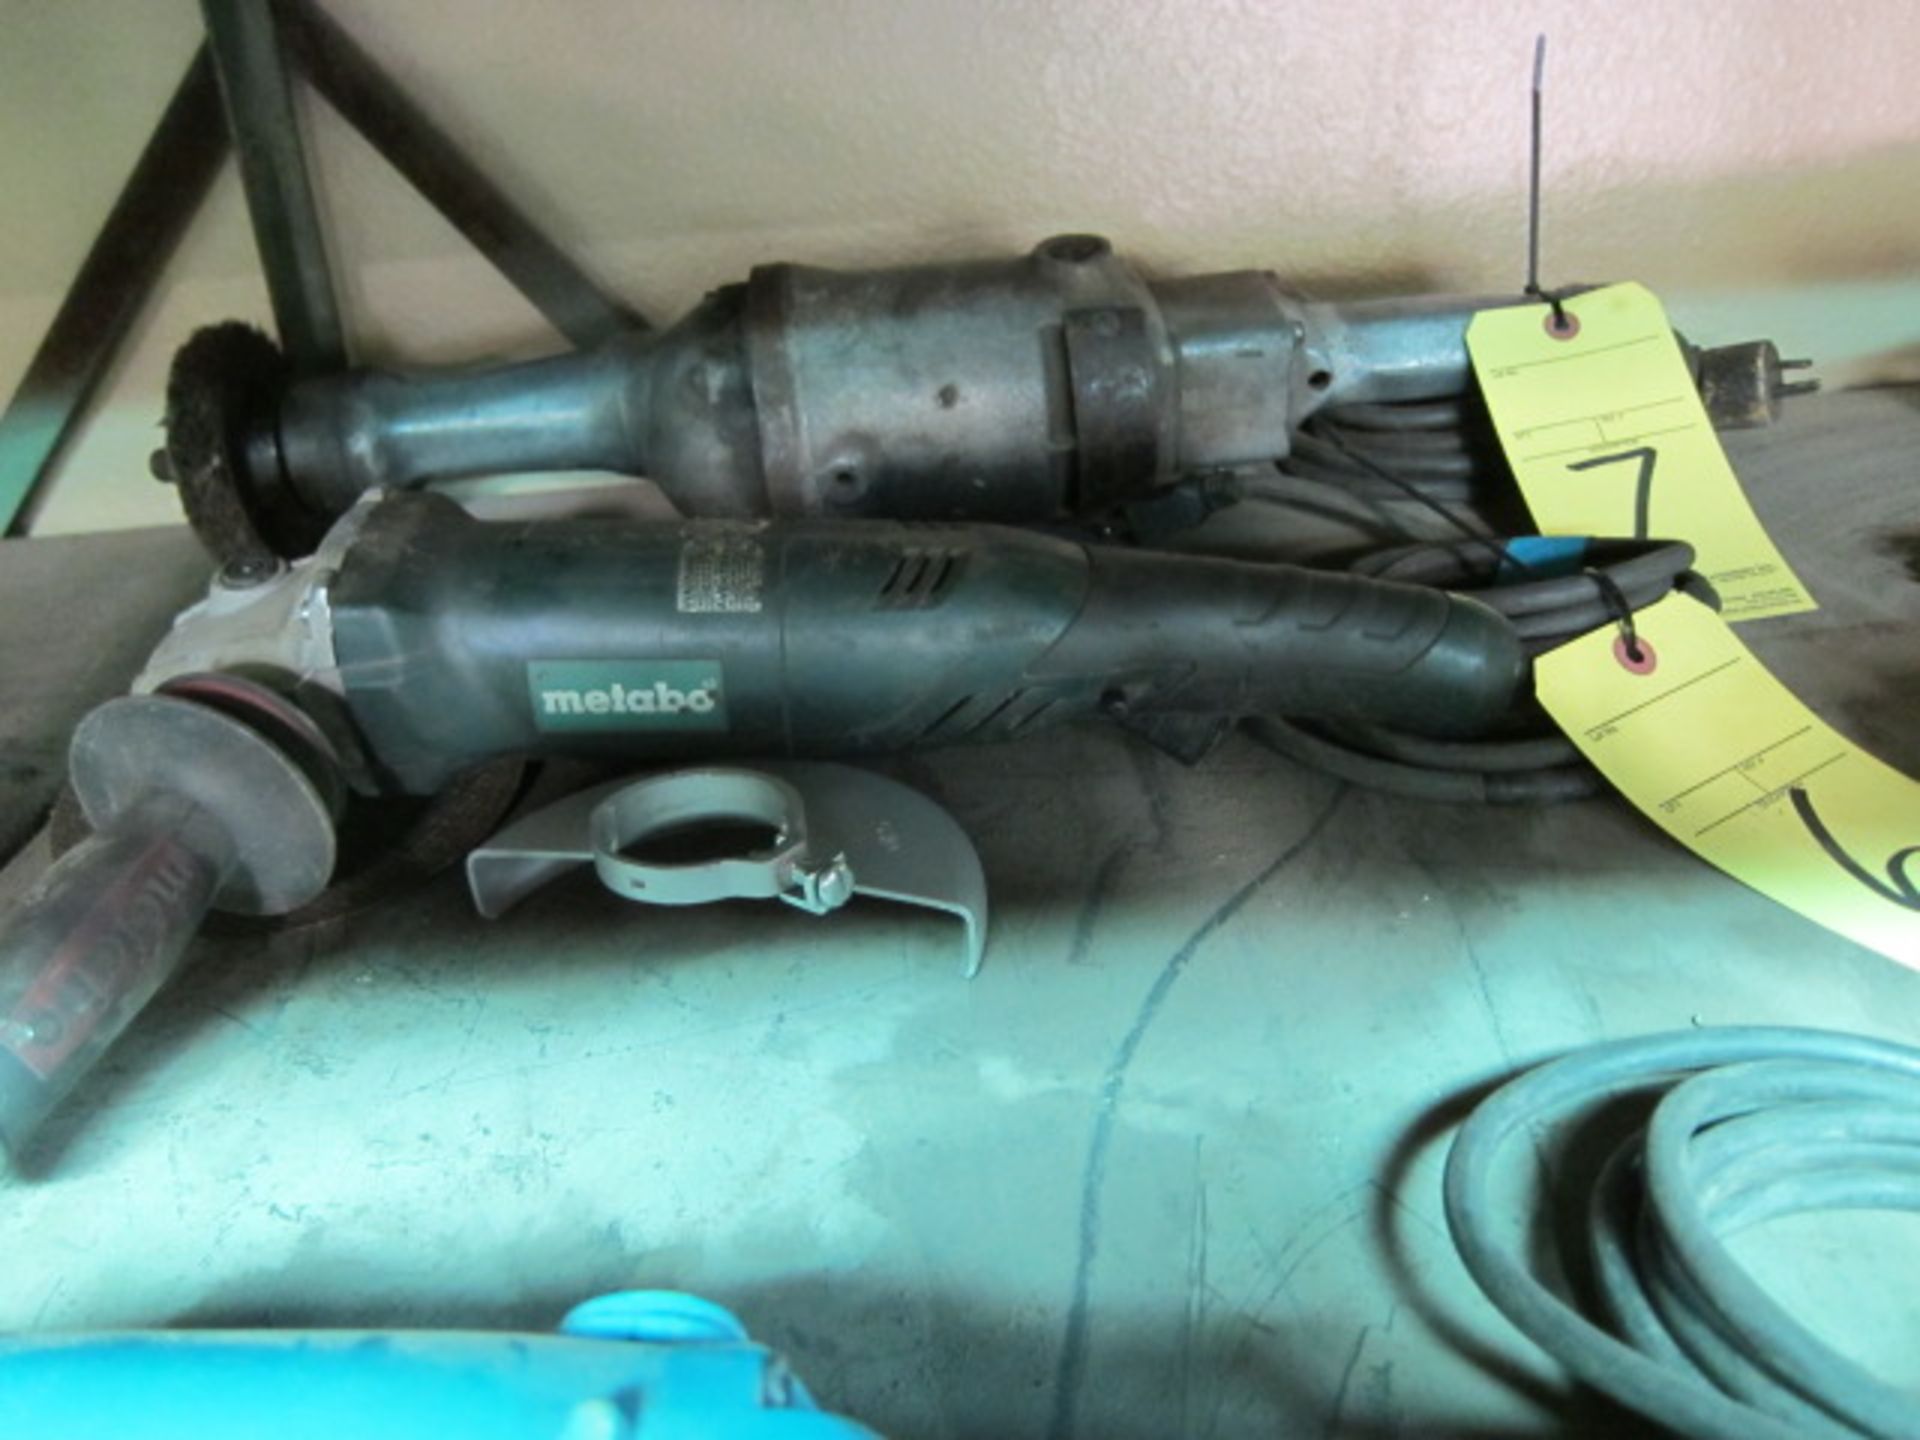 RIGHT ANGLE GRINDER, METABO 4"